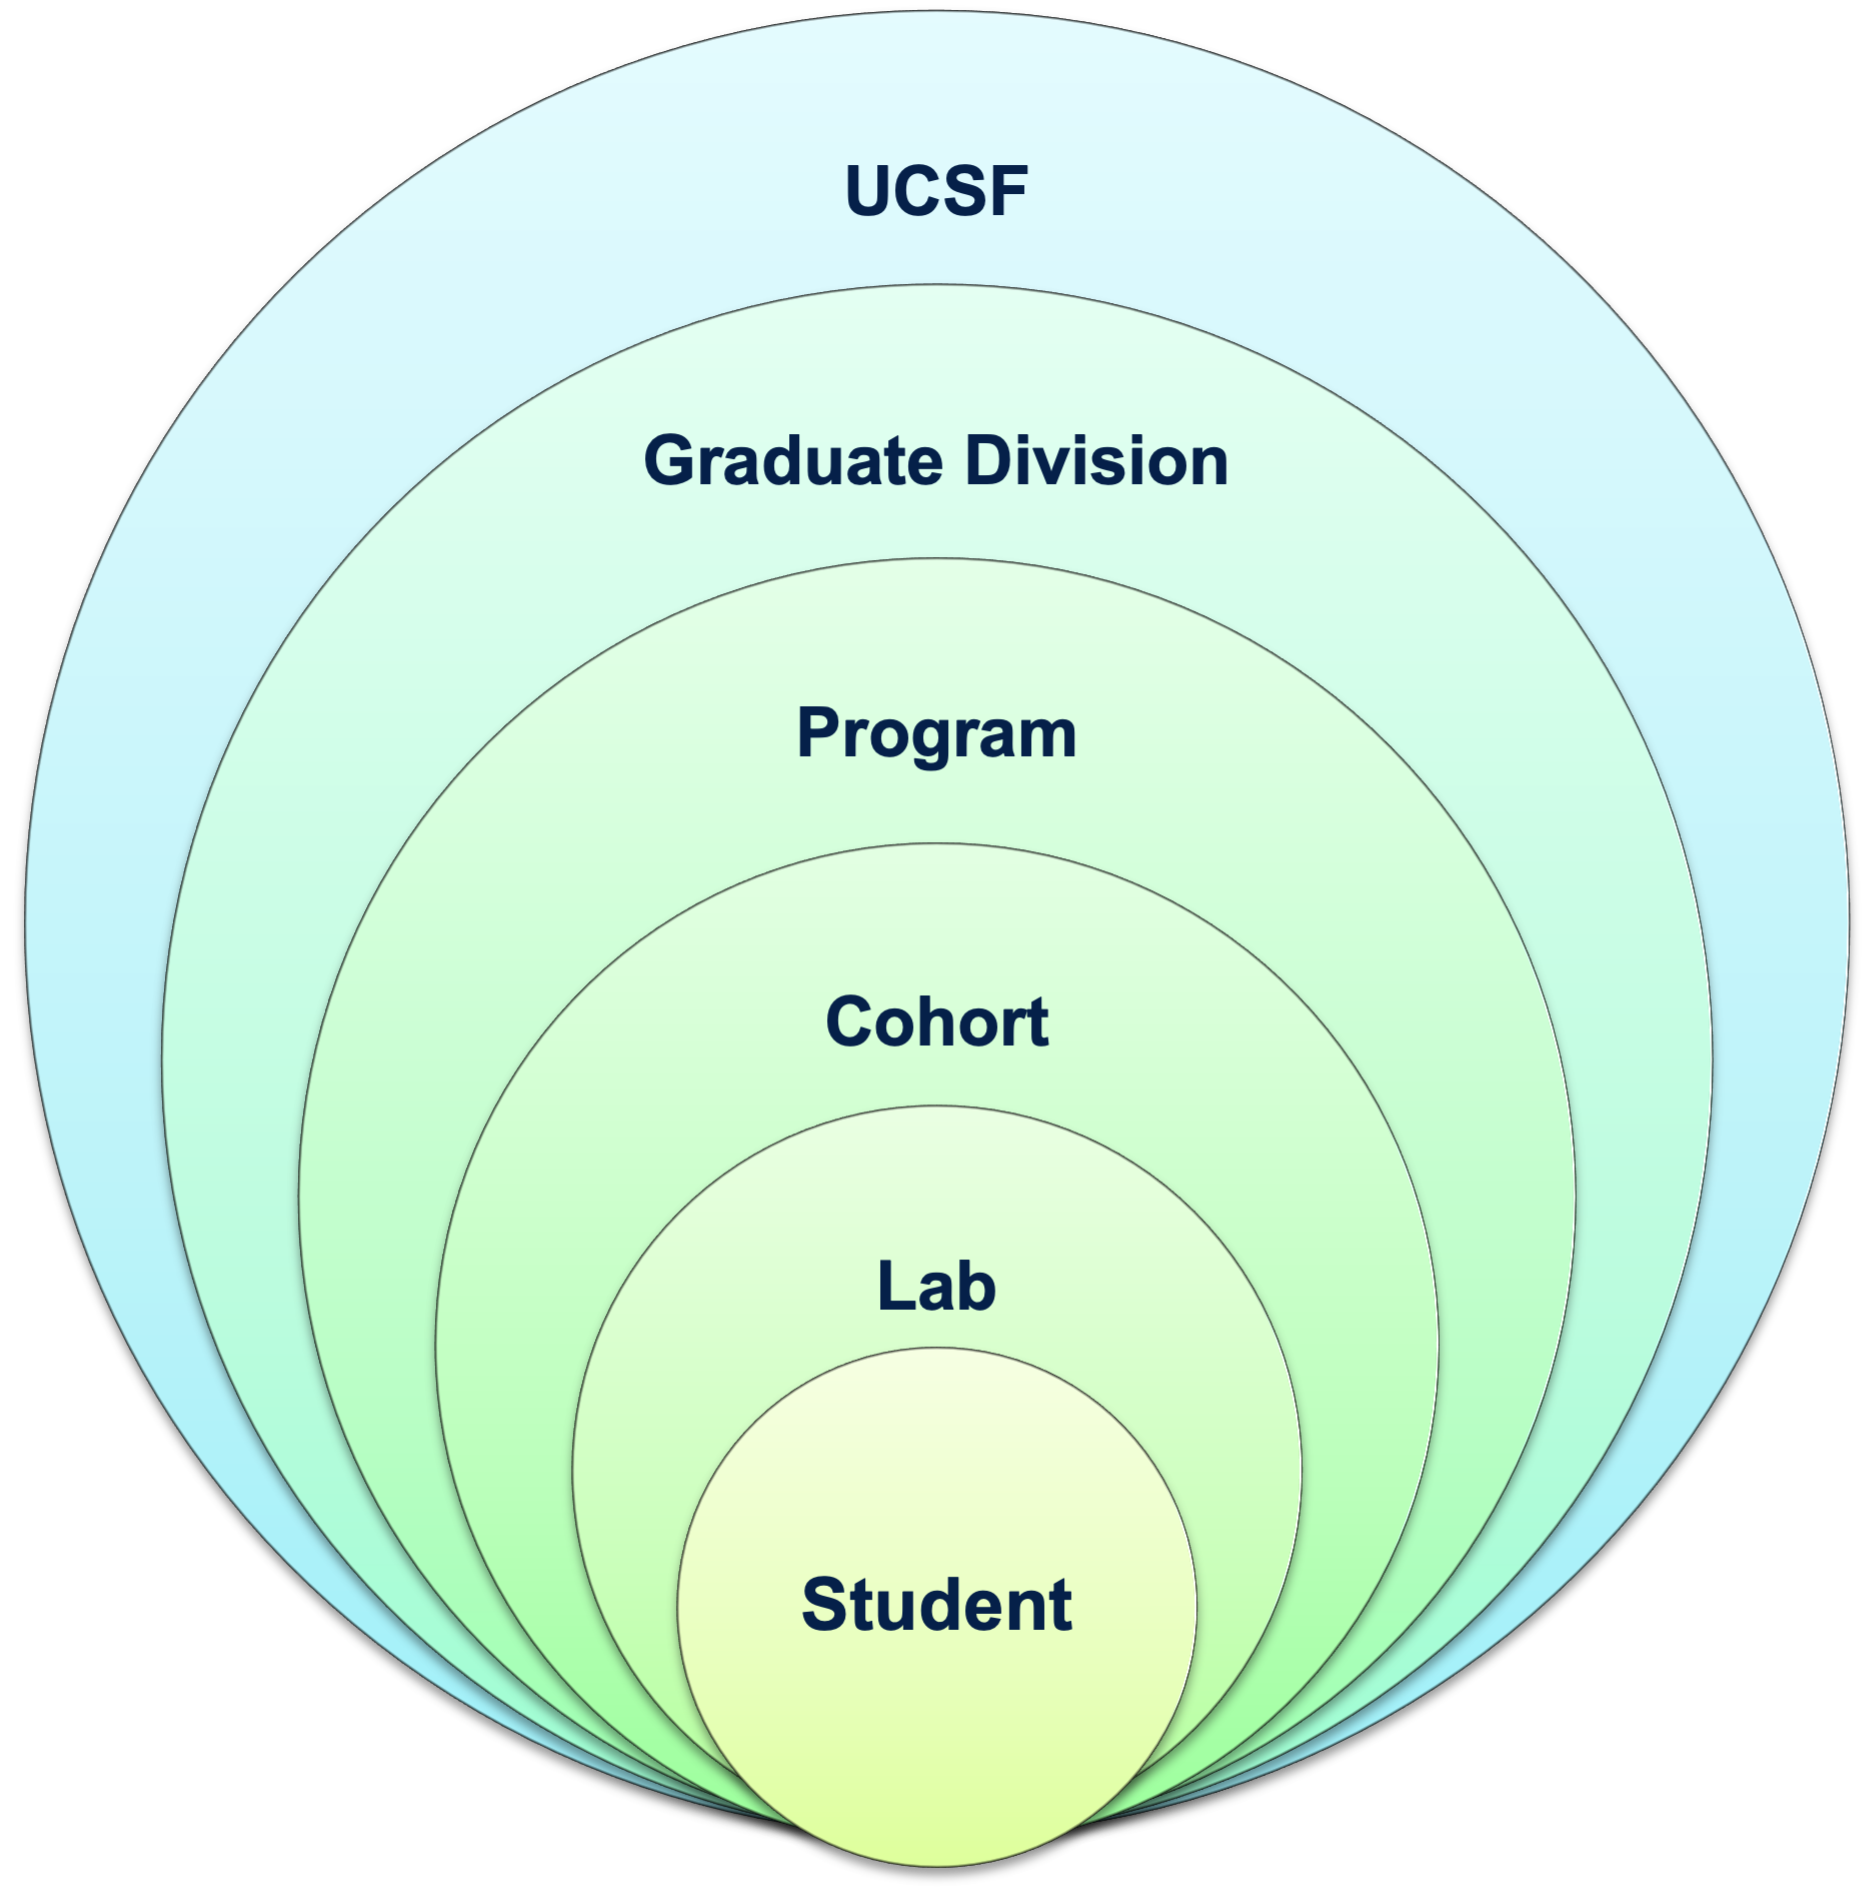 6 differently-sized circles stacked on top of each other. The order of the circles, from smallest to largest, are labeled "student",  "Lab", "Cohort", "Program", "Garduate Division", and "UCSF". The figure portrays the various communities that graduate students are part of at UCSF.